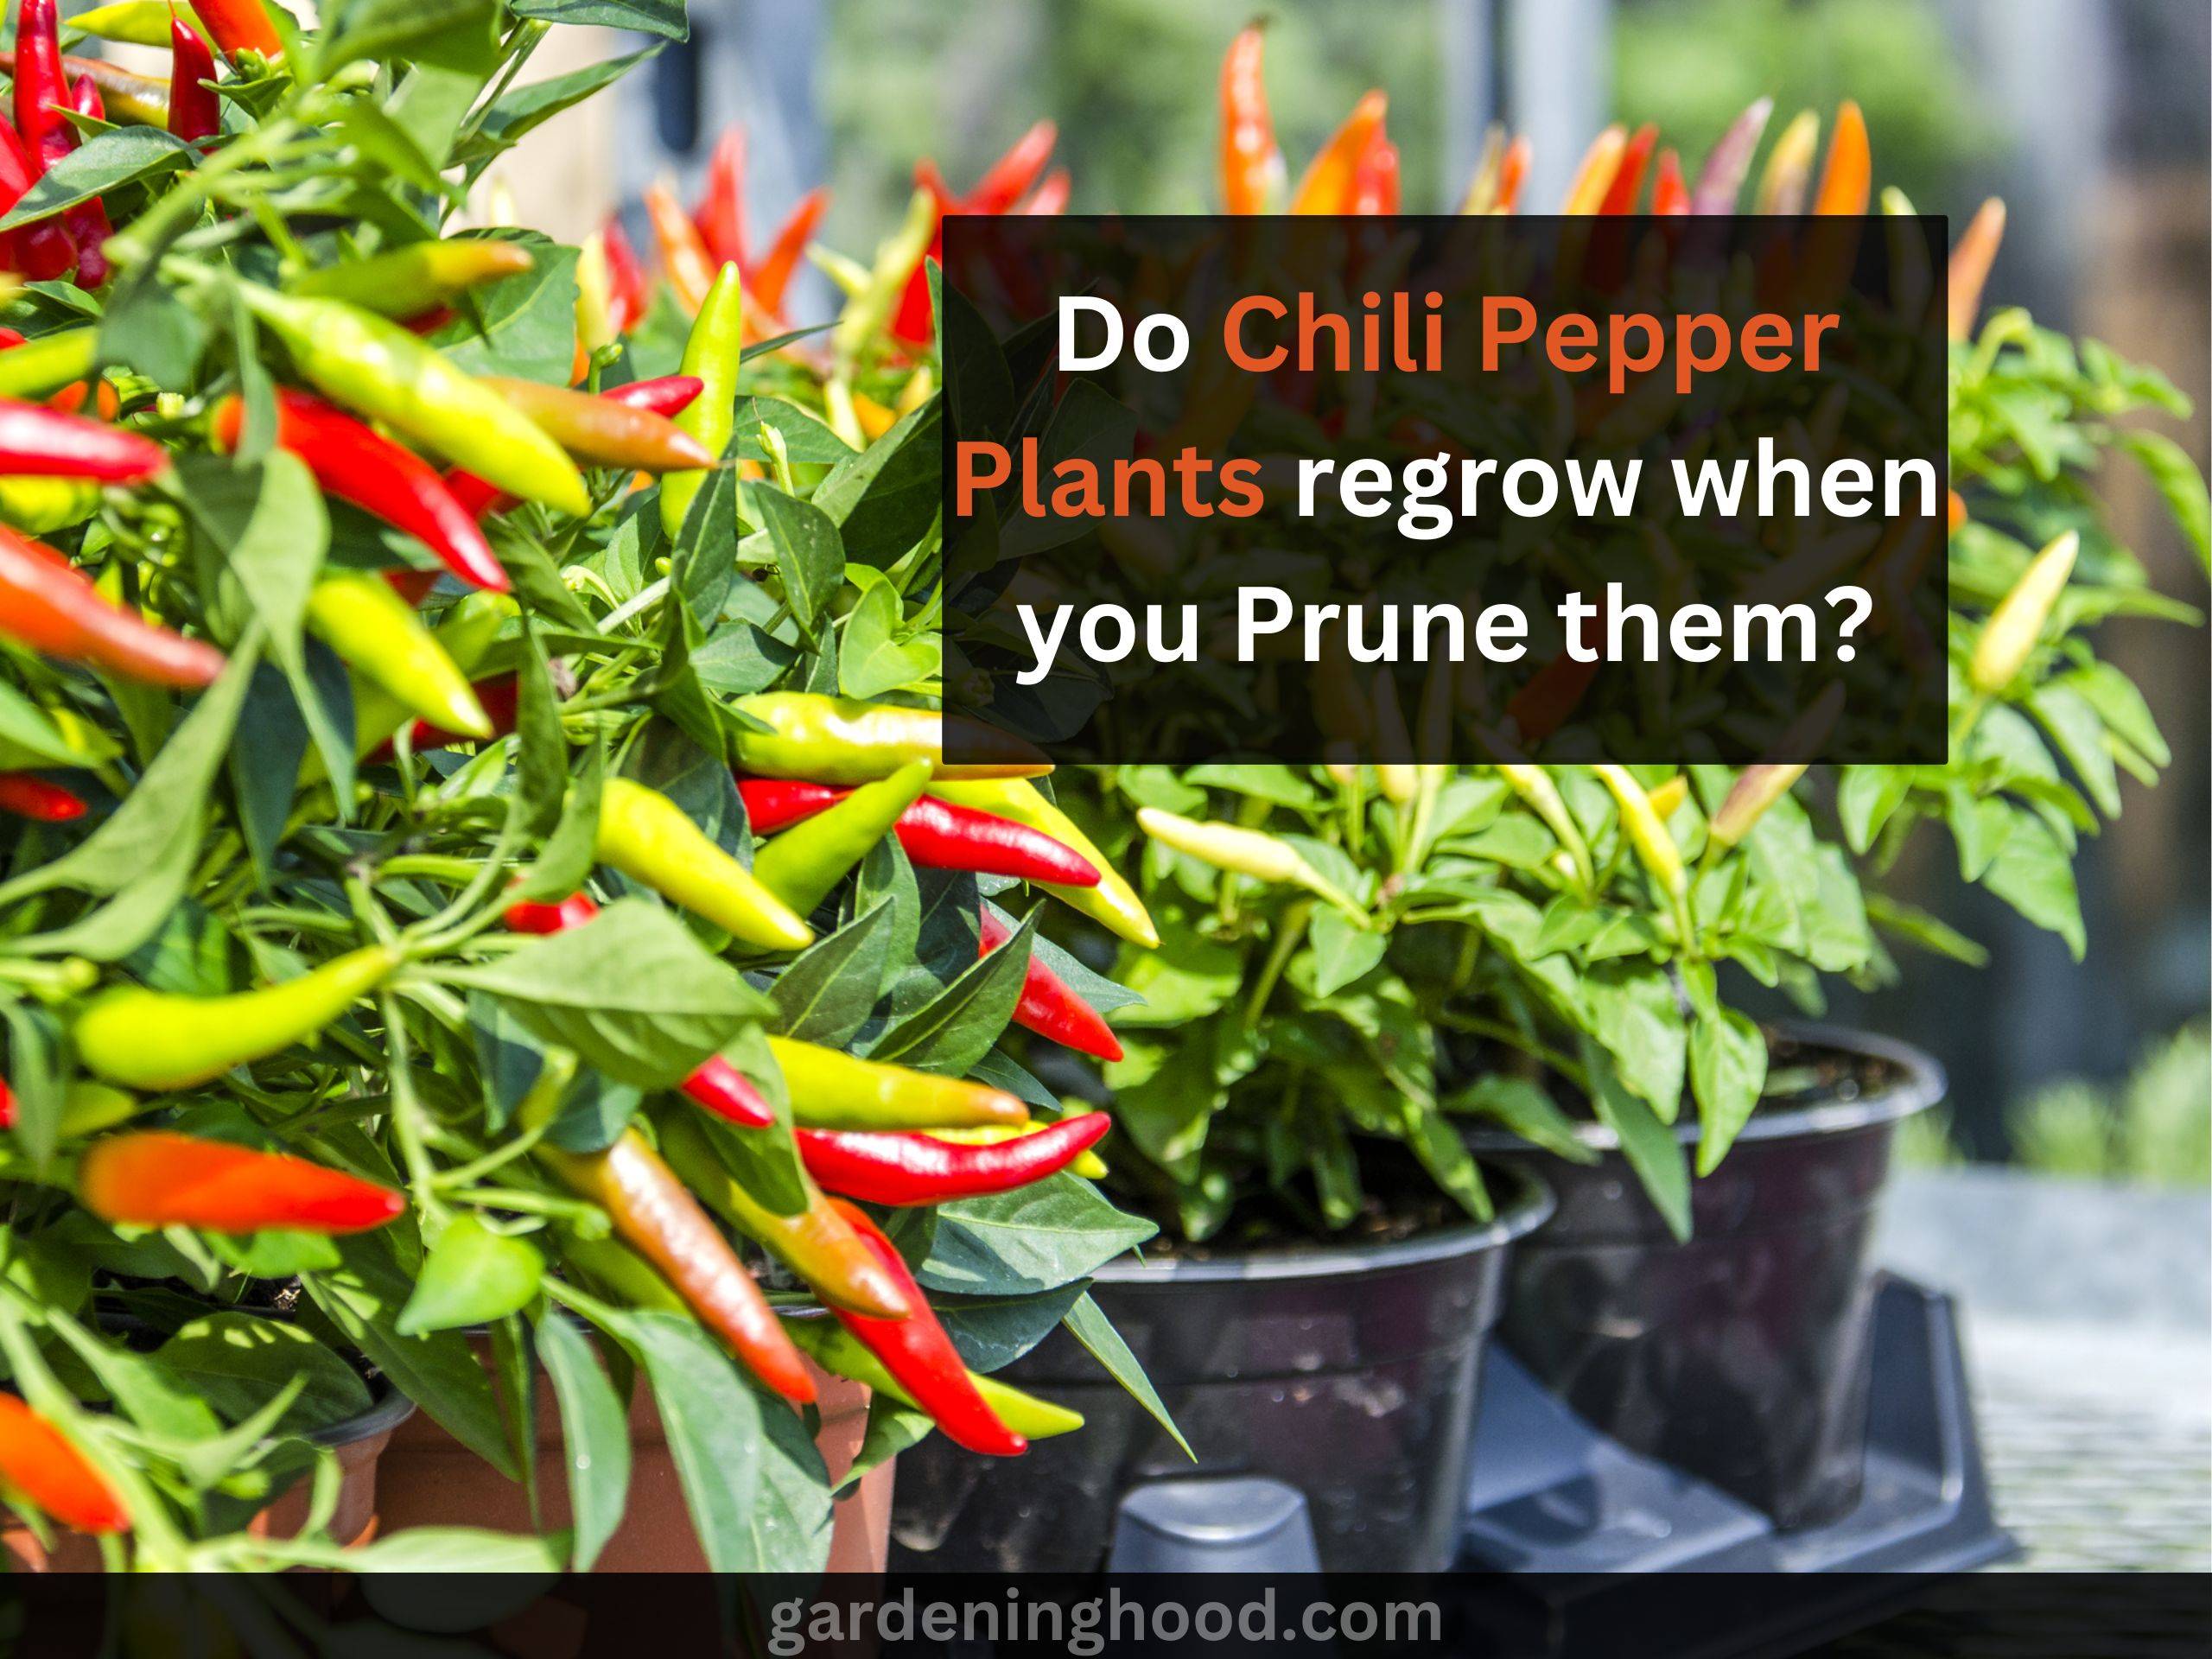 Do Chili Pepper Plants regrow when you Prune them?